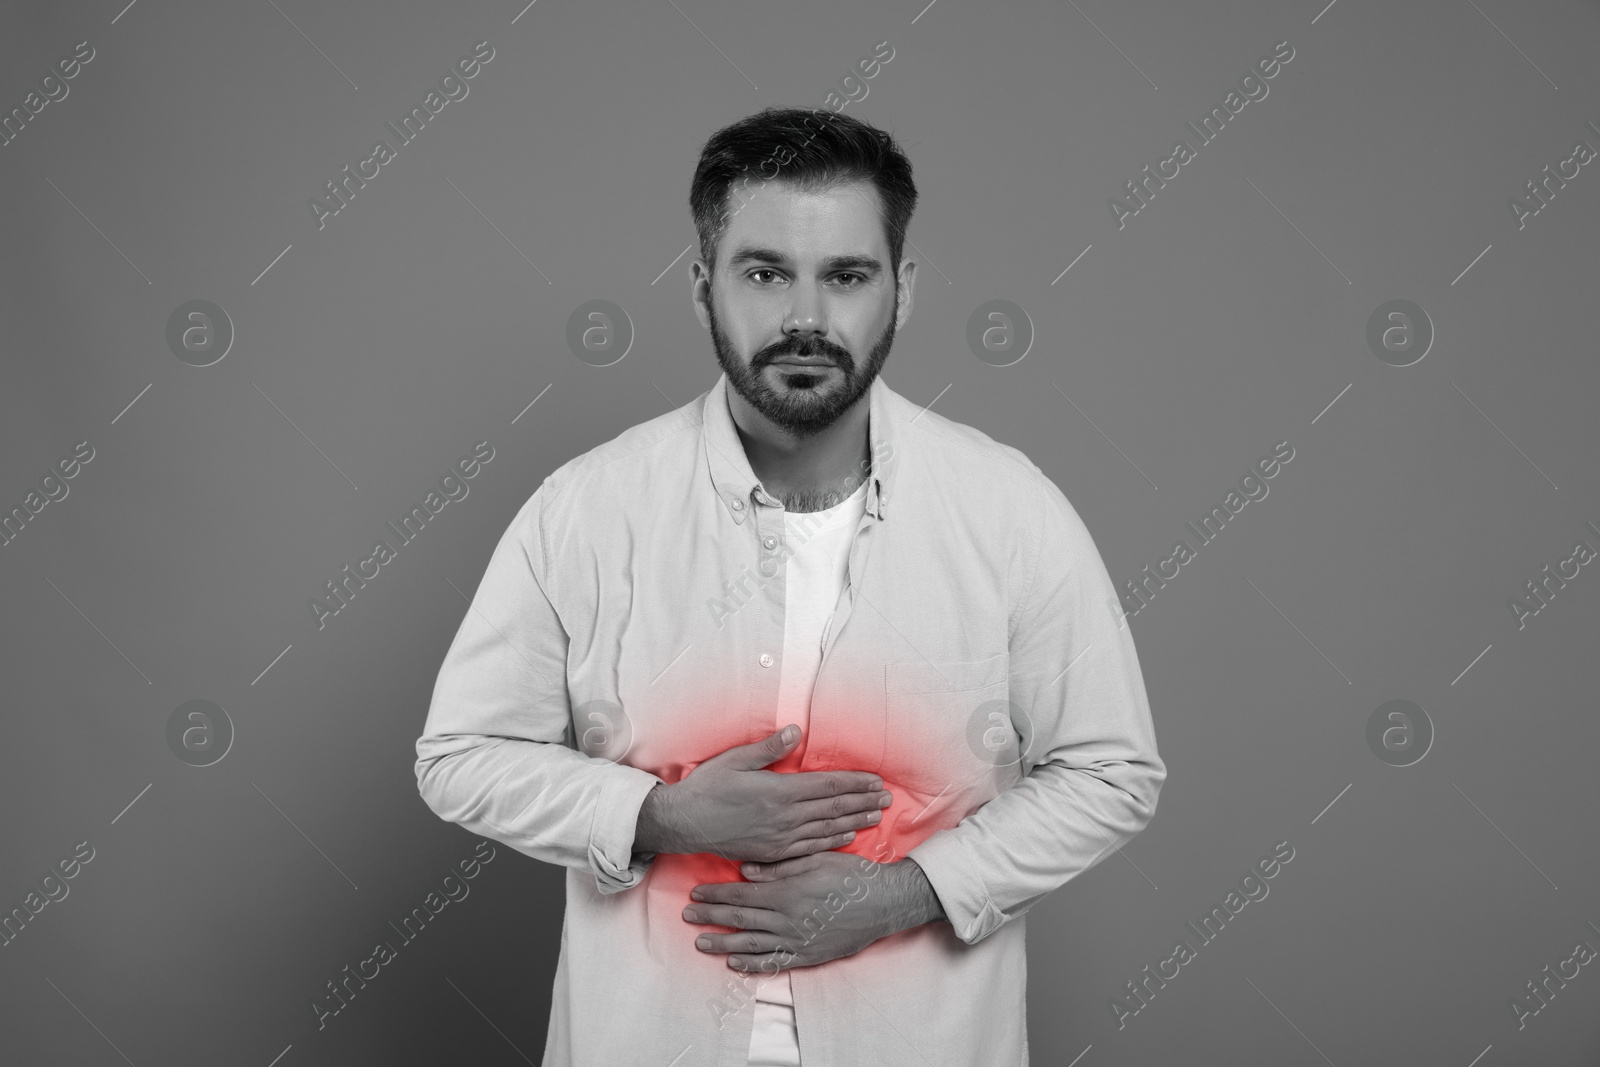 Image of Man suffering from abdominal pain on grey background. Black and white effect with red accent